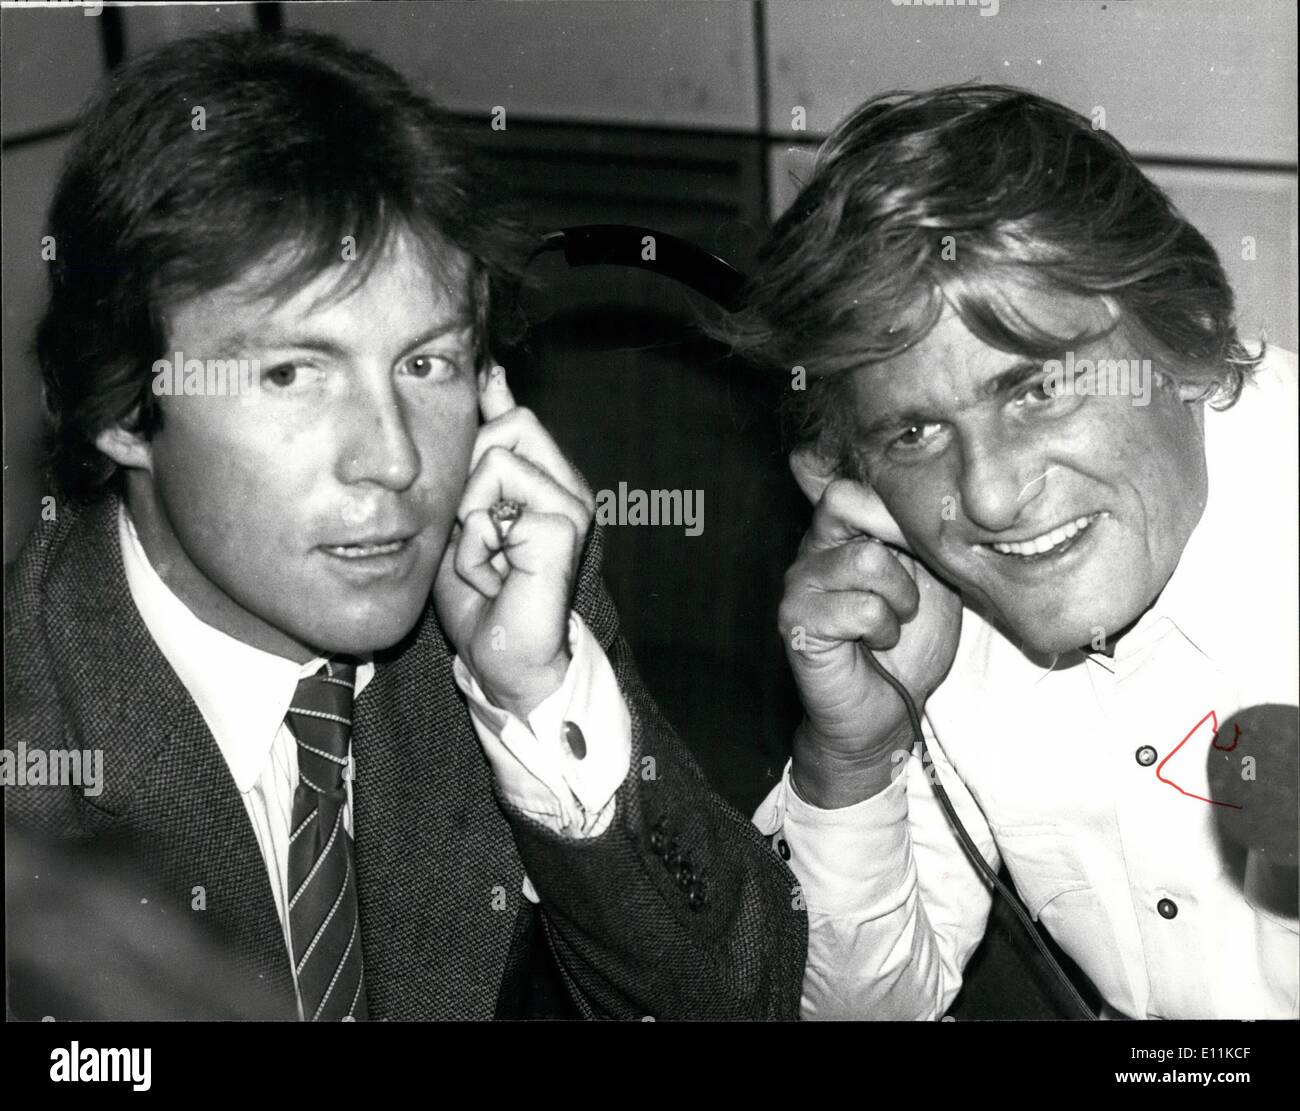 Jun. 06, 1978 - Roddy Llewellyn is a Guest on Pete Murray Show - Roddy Llewellye the Friend of Princess Margaret was the Guest today of Pete Murray in his BBC Radio 2 ''Open House'' Programme - Photo Shows: Roddy and Pete During the ''Open House'' Programme this morning. Stock Photo